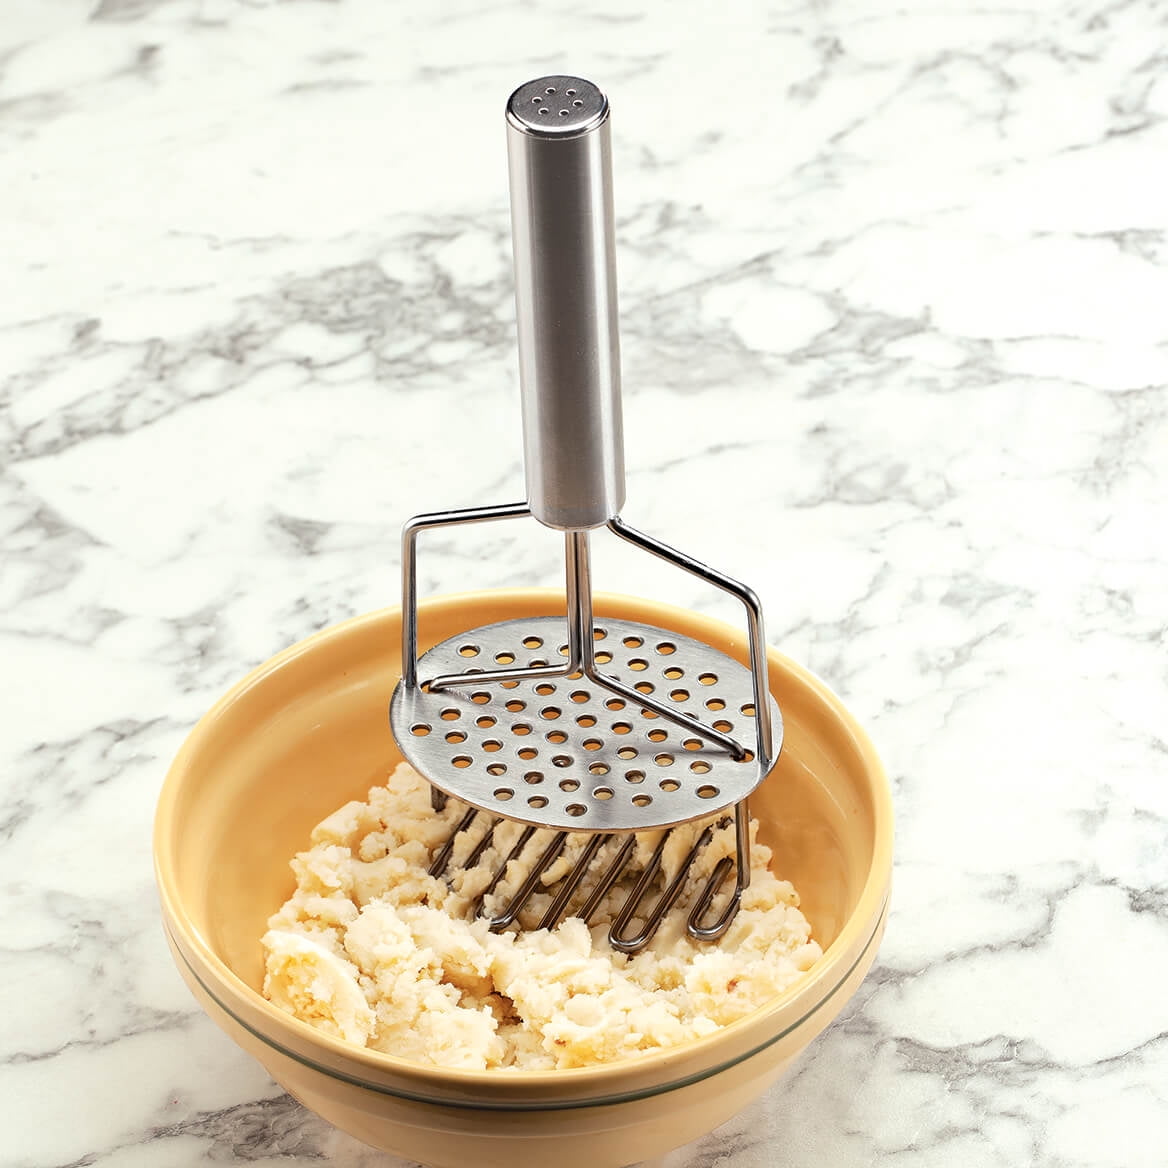 2021 Stainless Steel Potato Masher With Broad Mashing Plate For Smooth Mashed  Potatoes Fruit Vegetable Tools